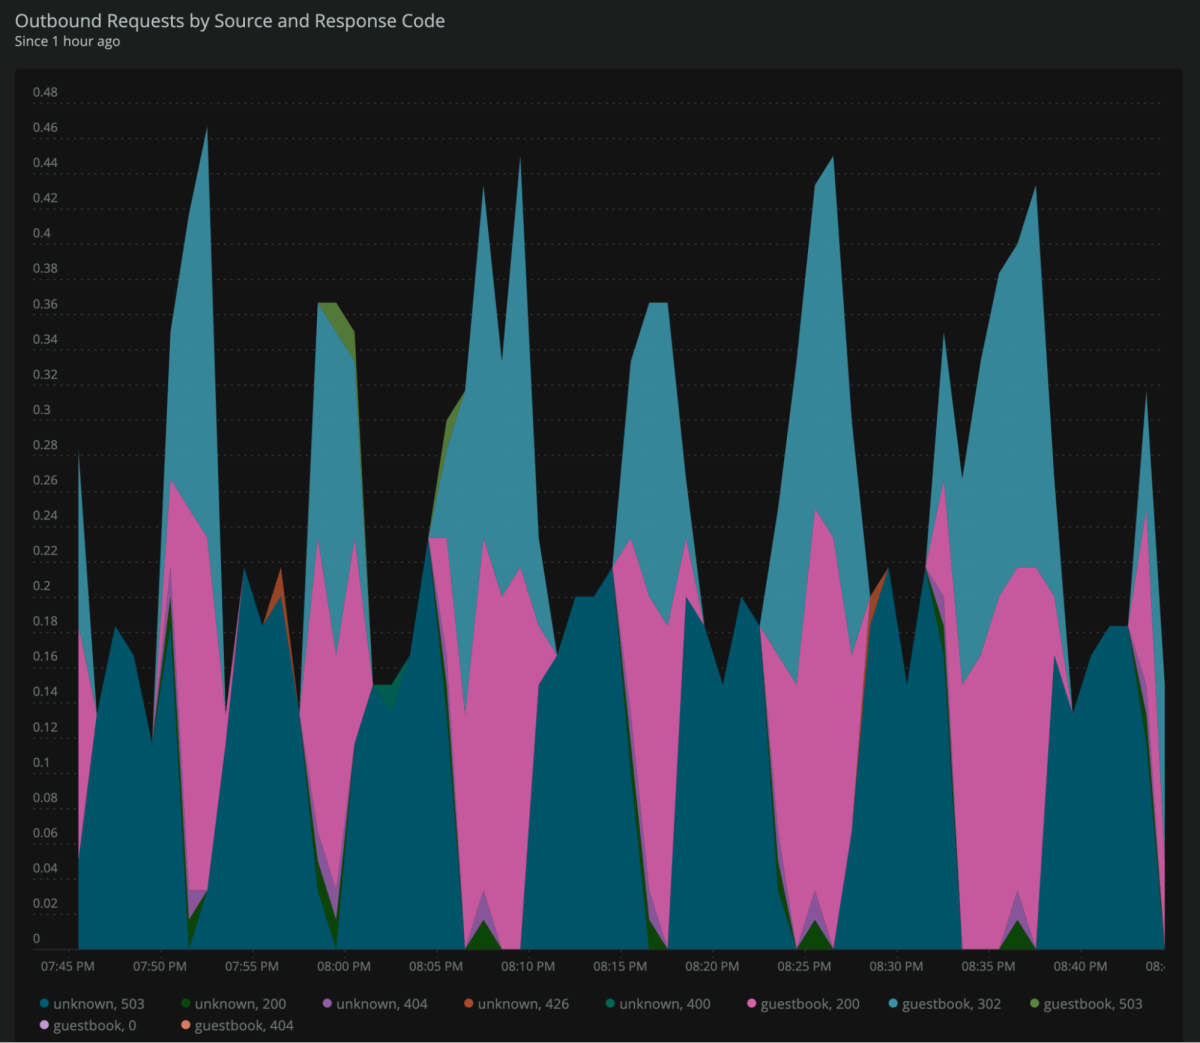 New Relic dashboard shows outbound Istio requests by source and response code